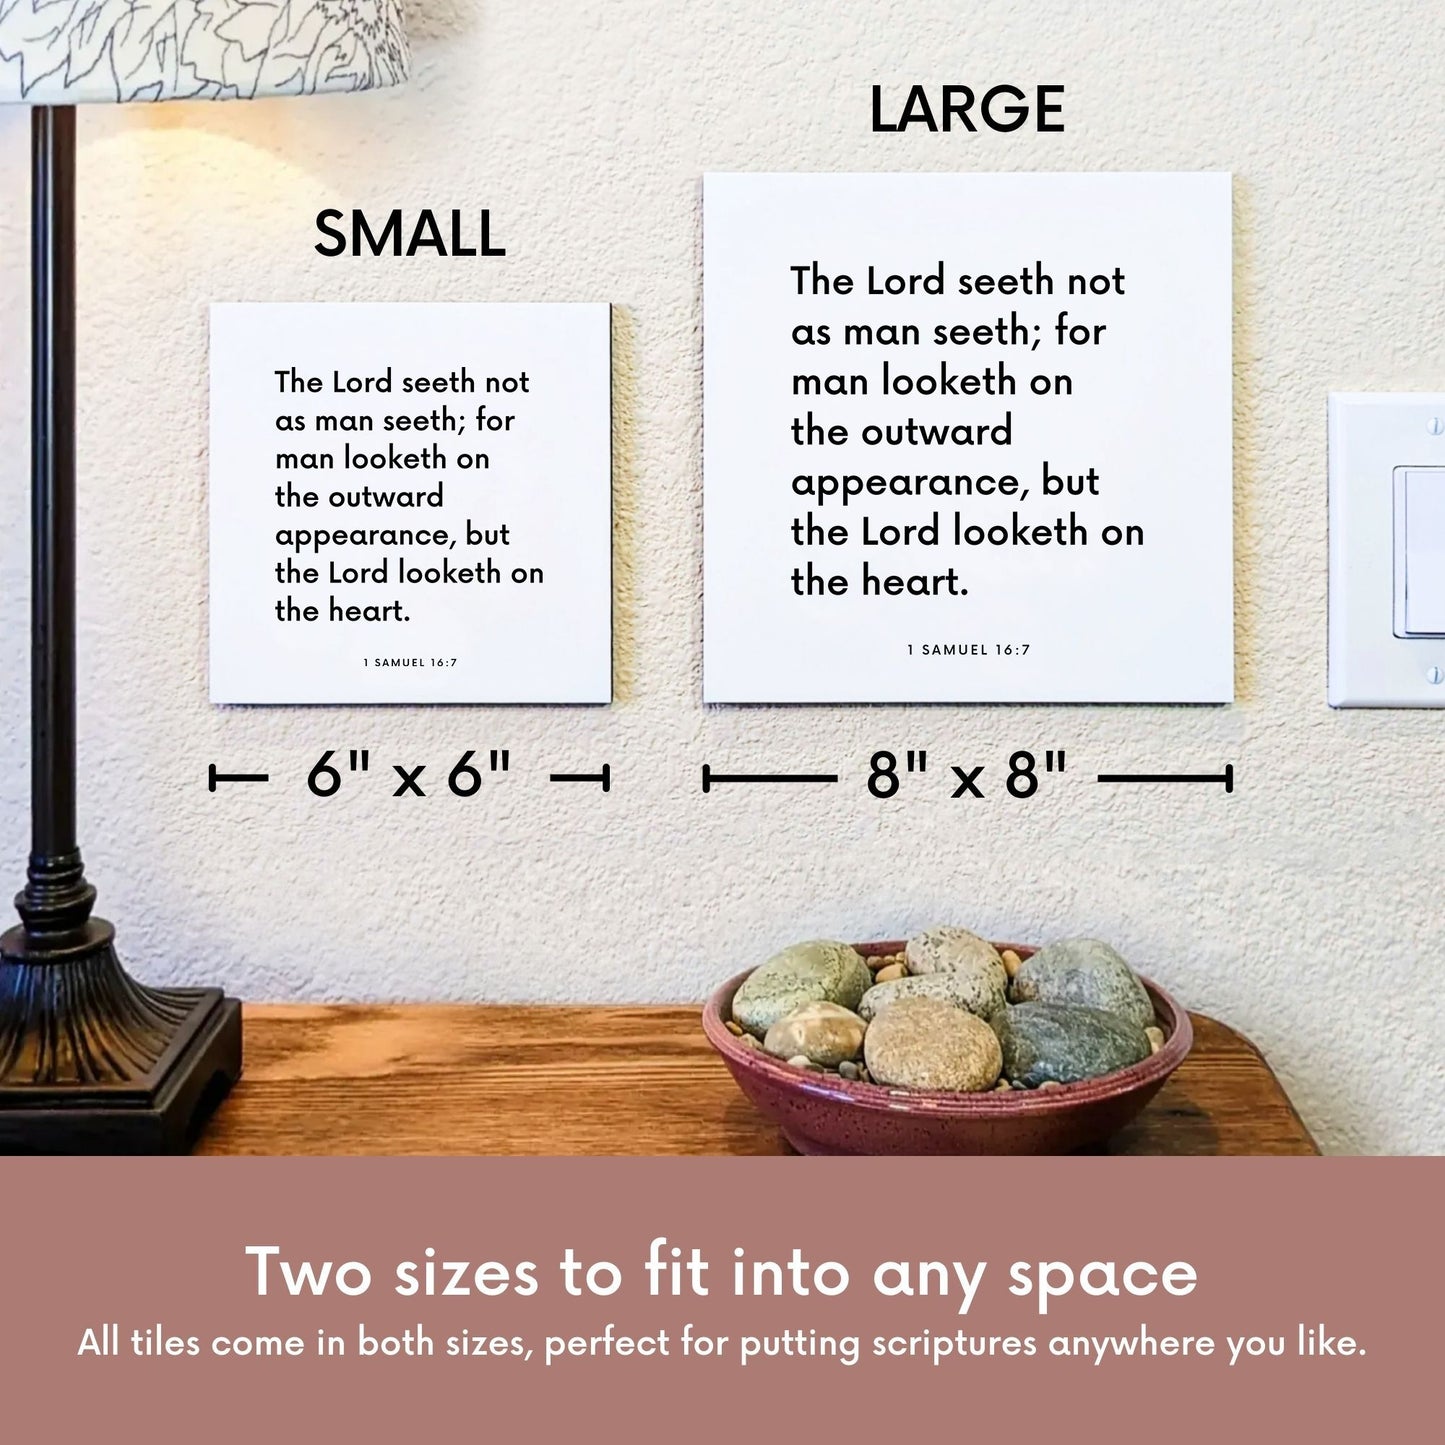 Scripture tile size comparison for 1 Samuel 16:7 - "The Lord seeth not as man seeth"